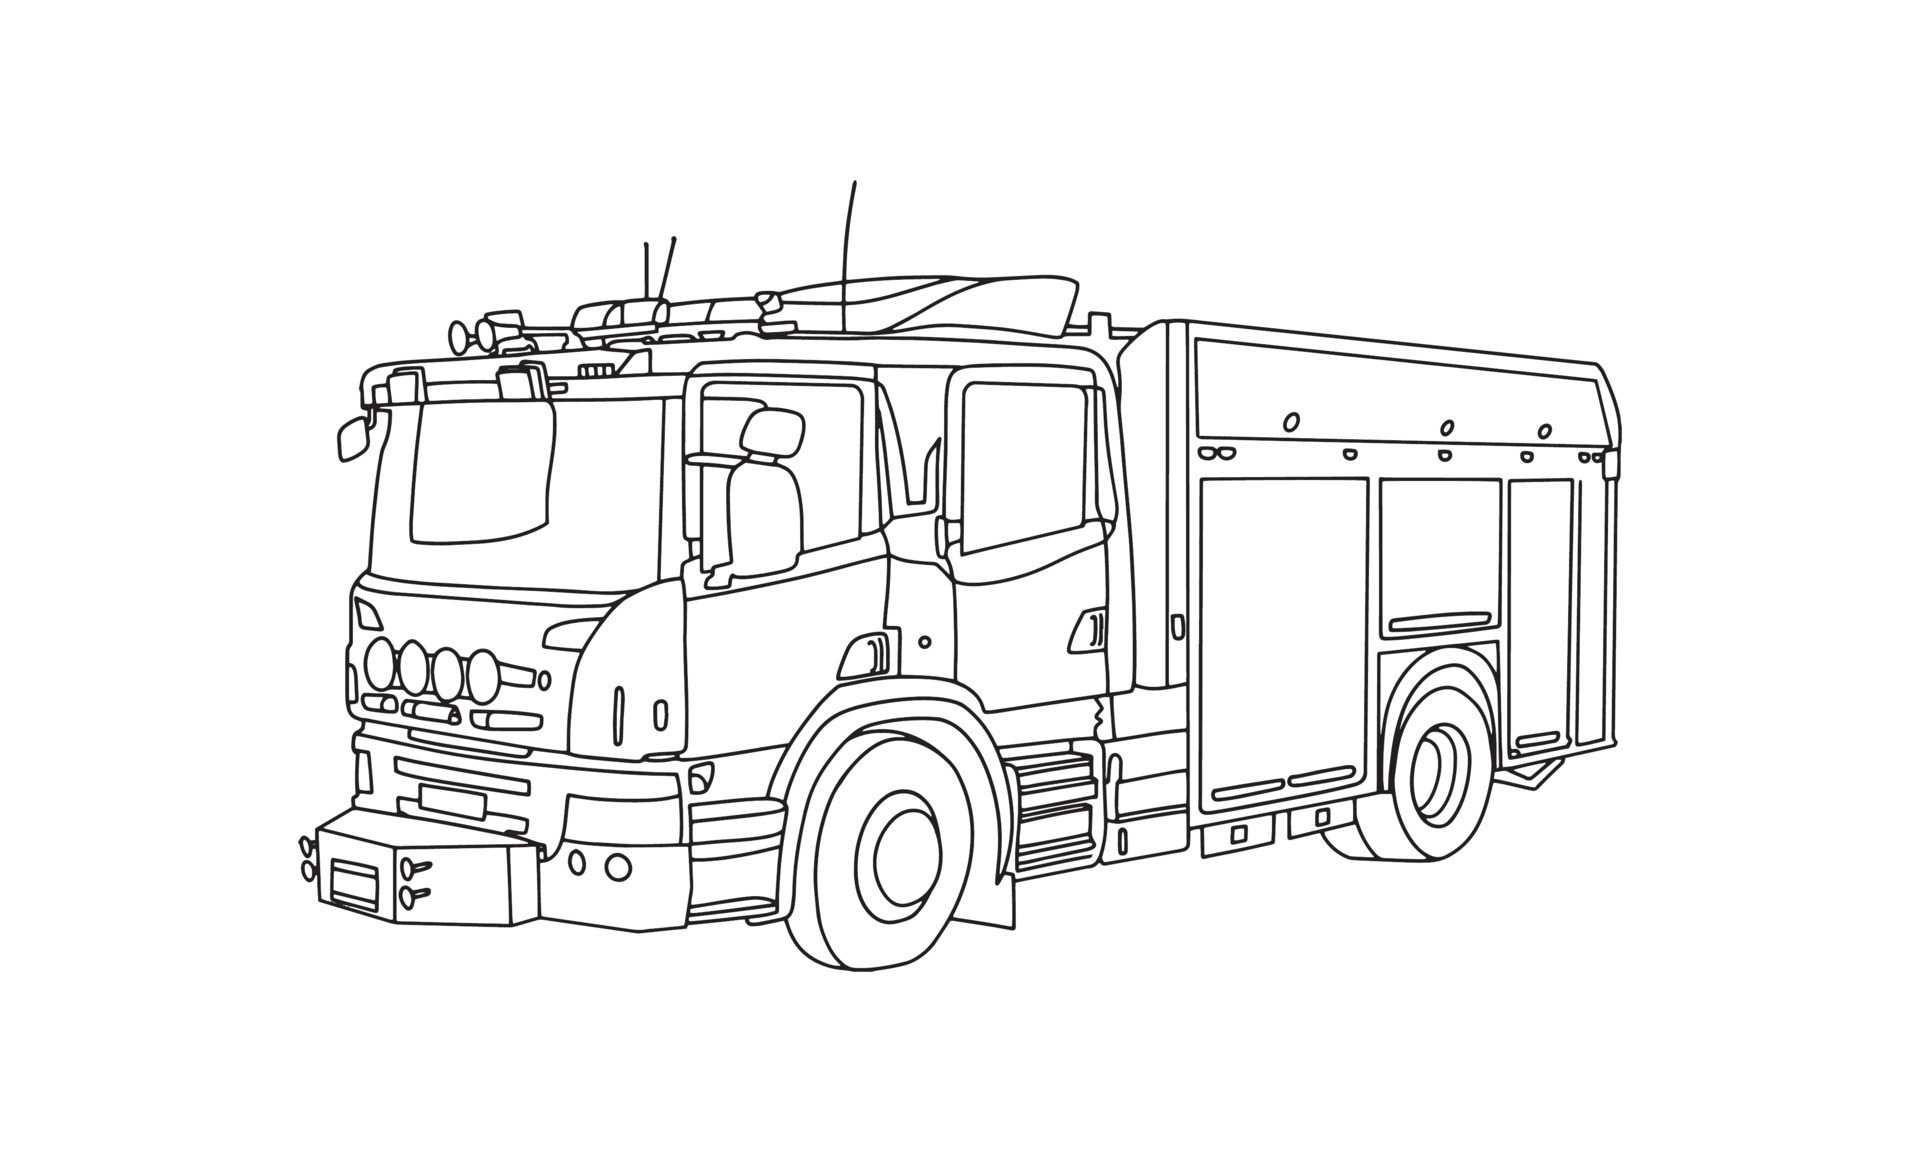 How to draw a Fire Truck  Step by step Drawing tutorials  Truck coloring  pages Fire trucks Fire truck drawing